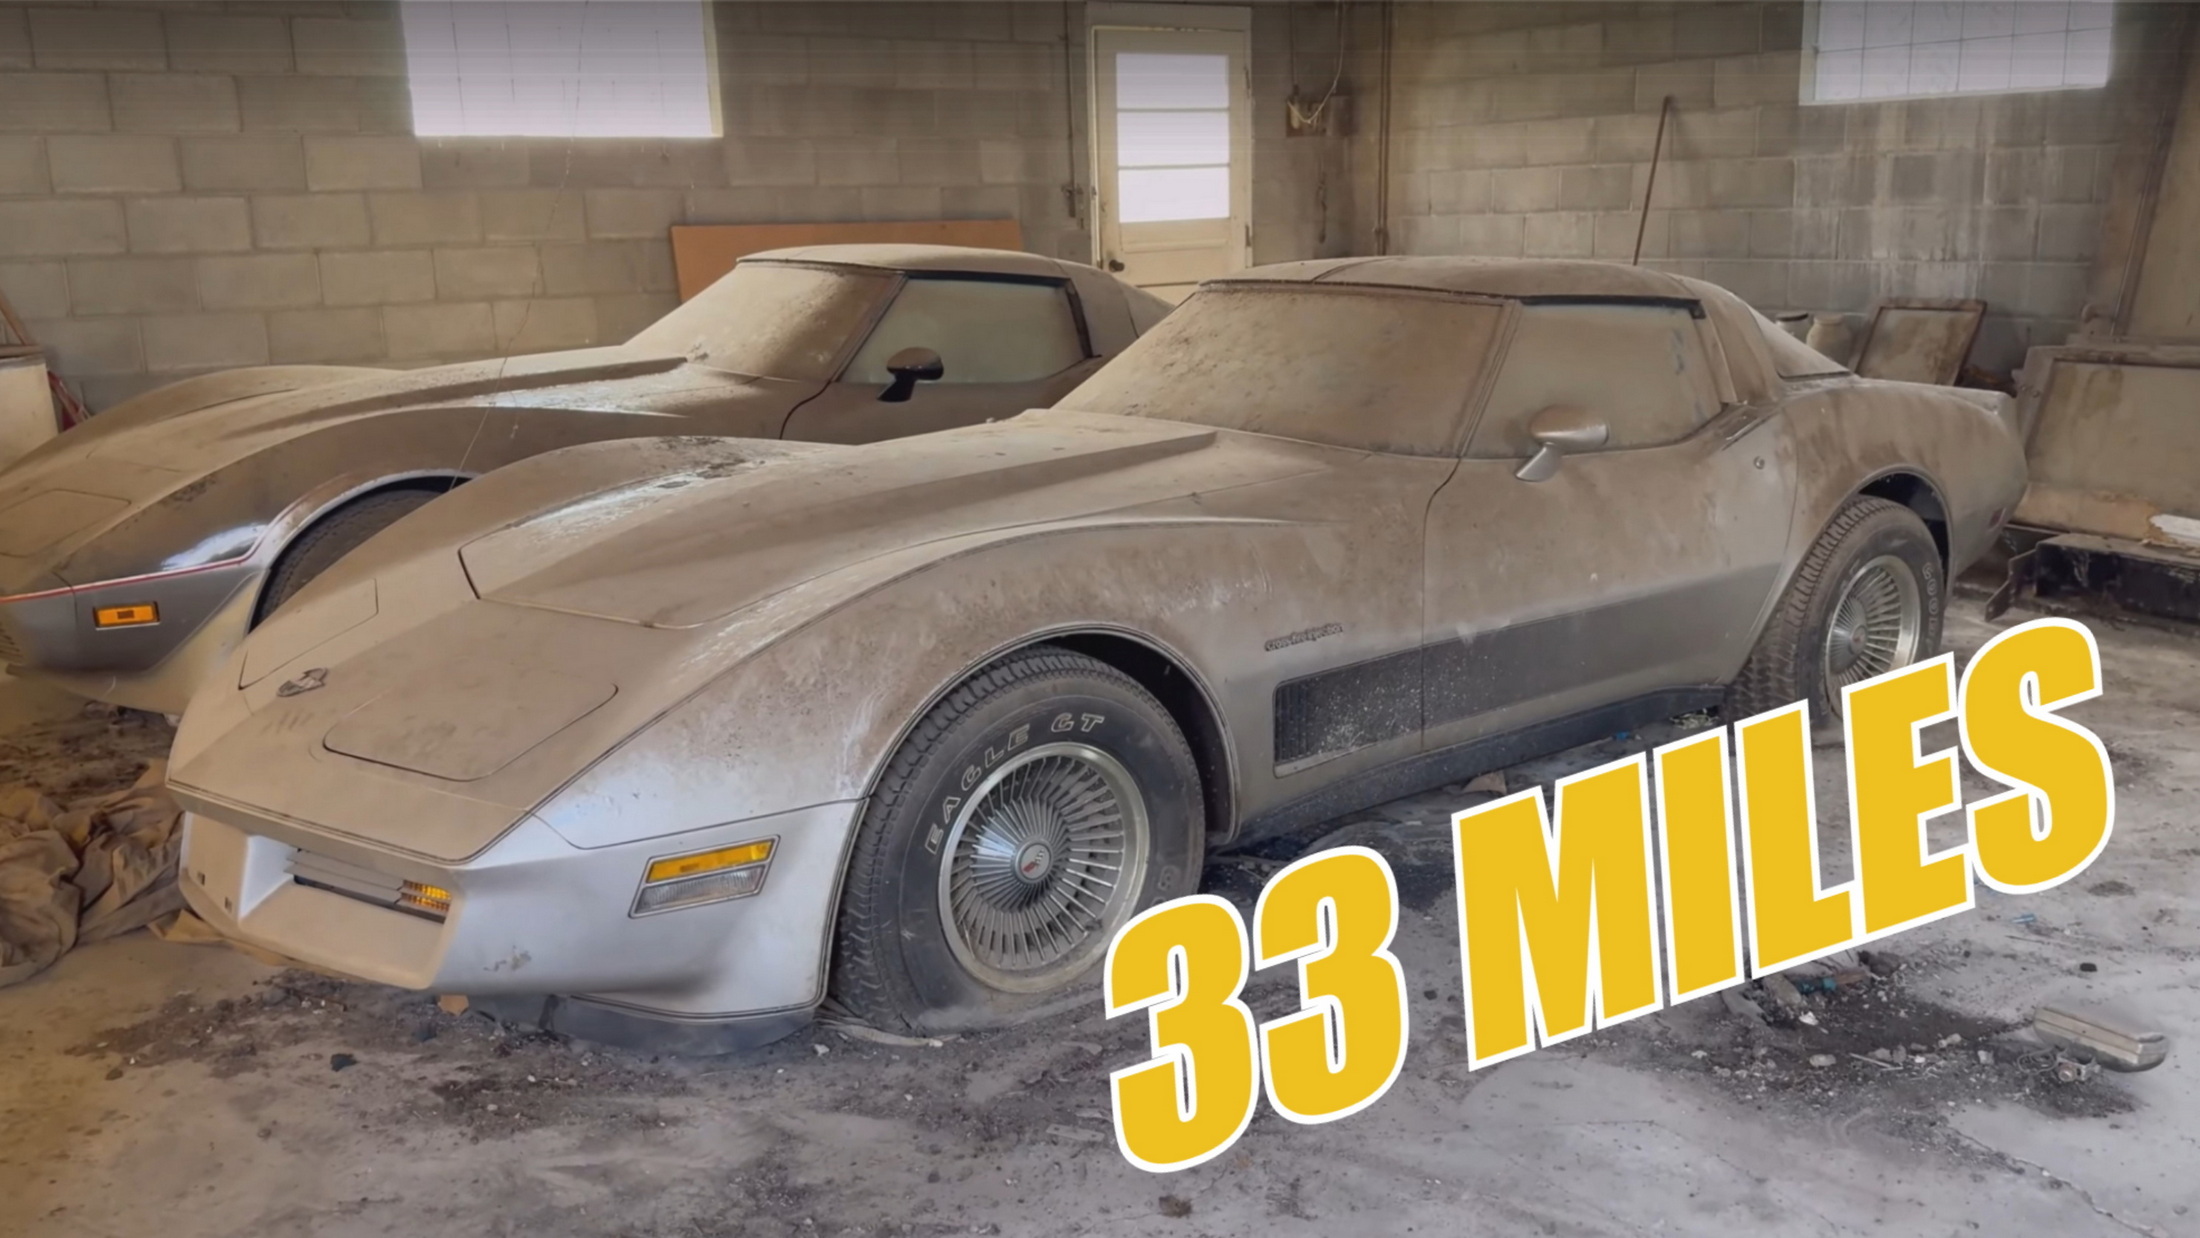 1982 Chevrolet Corvette With 33 Miles Gets First Wash In 42 Years